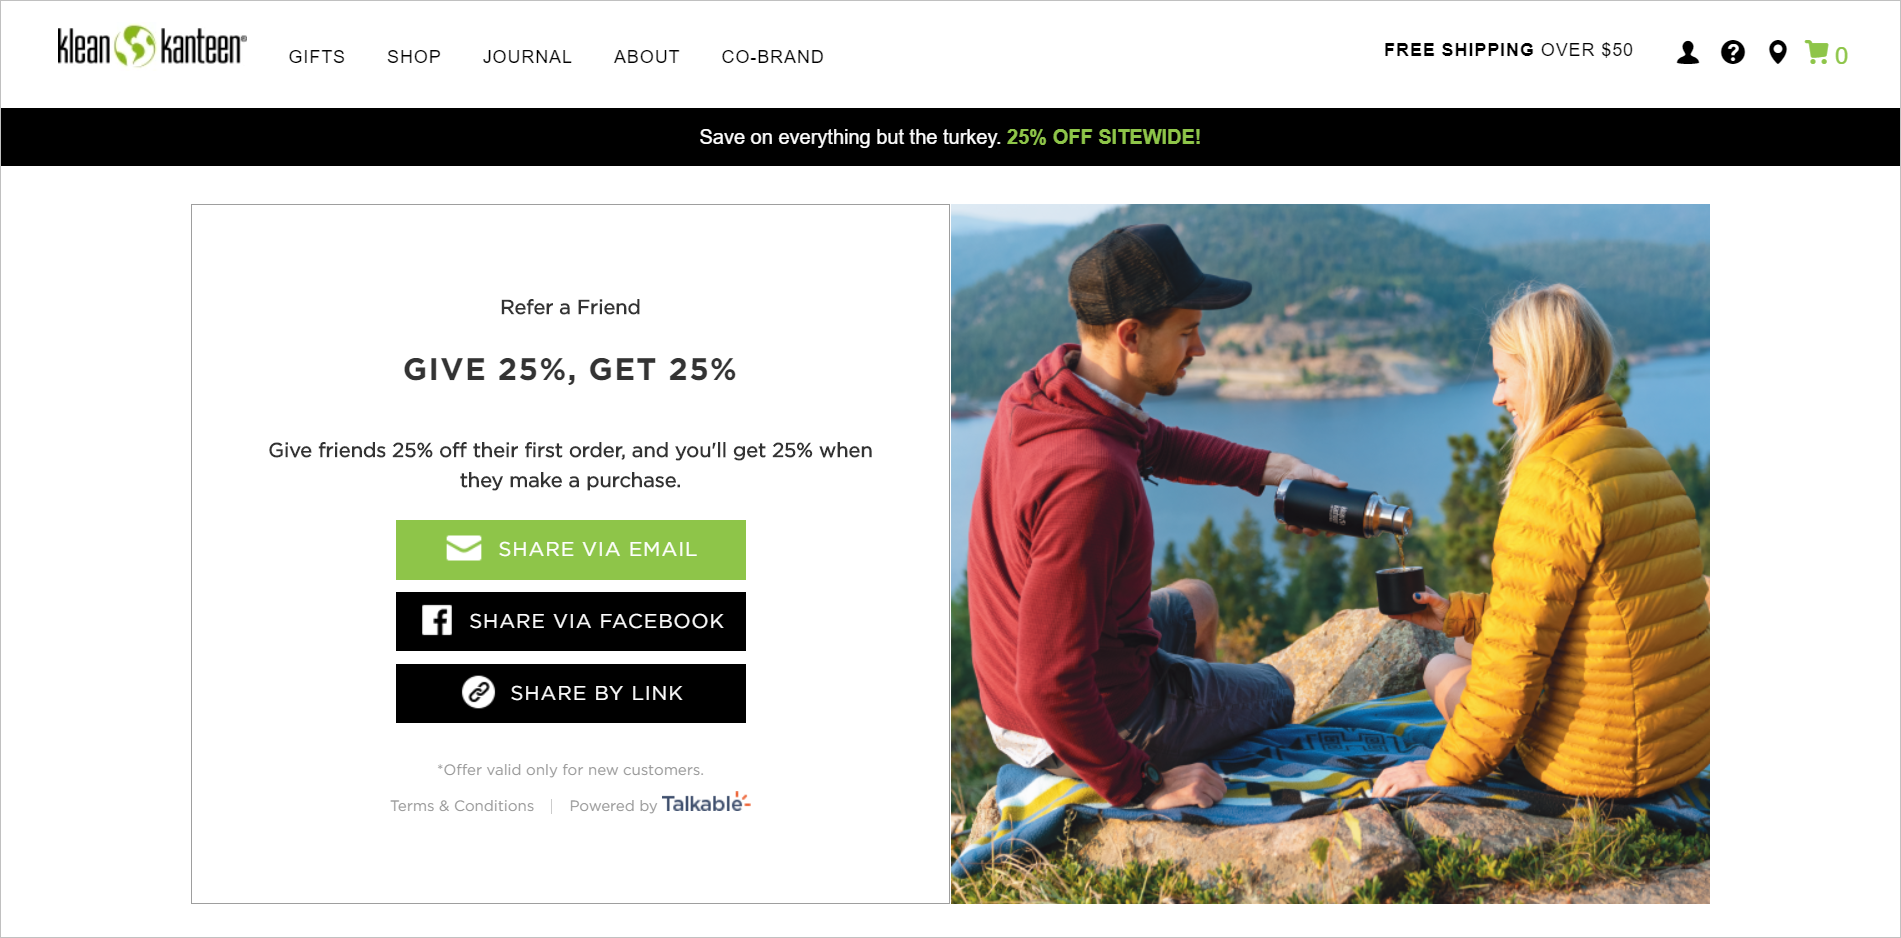 discount pricing strategies- kleankanteen.com referral page tells visitors that they can give their friends 25% off their first order and the visitor gets 25% when a friend makes a purchase